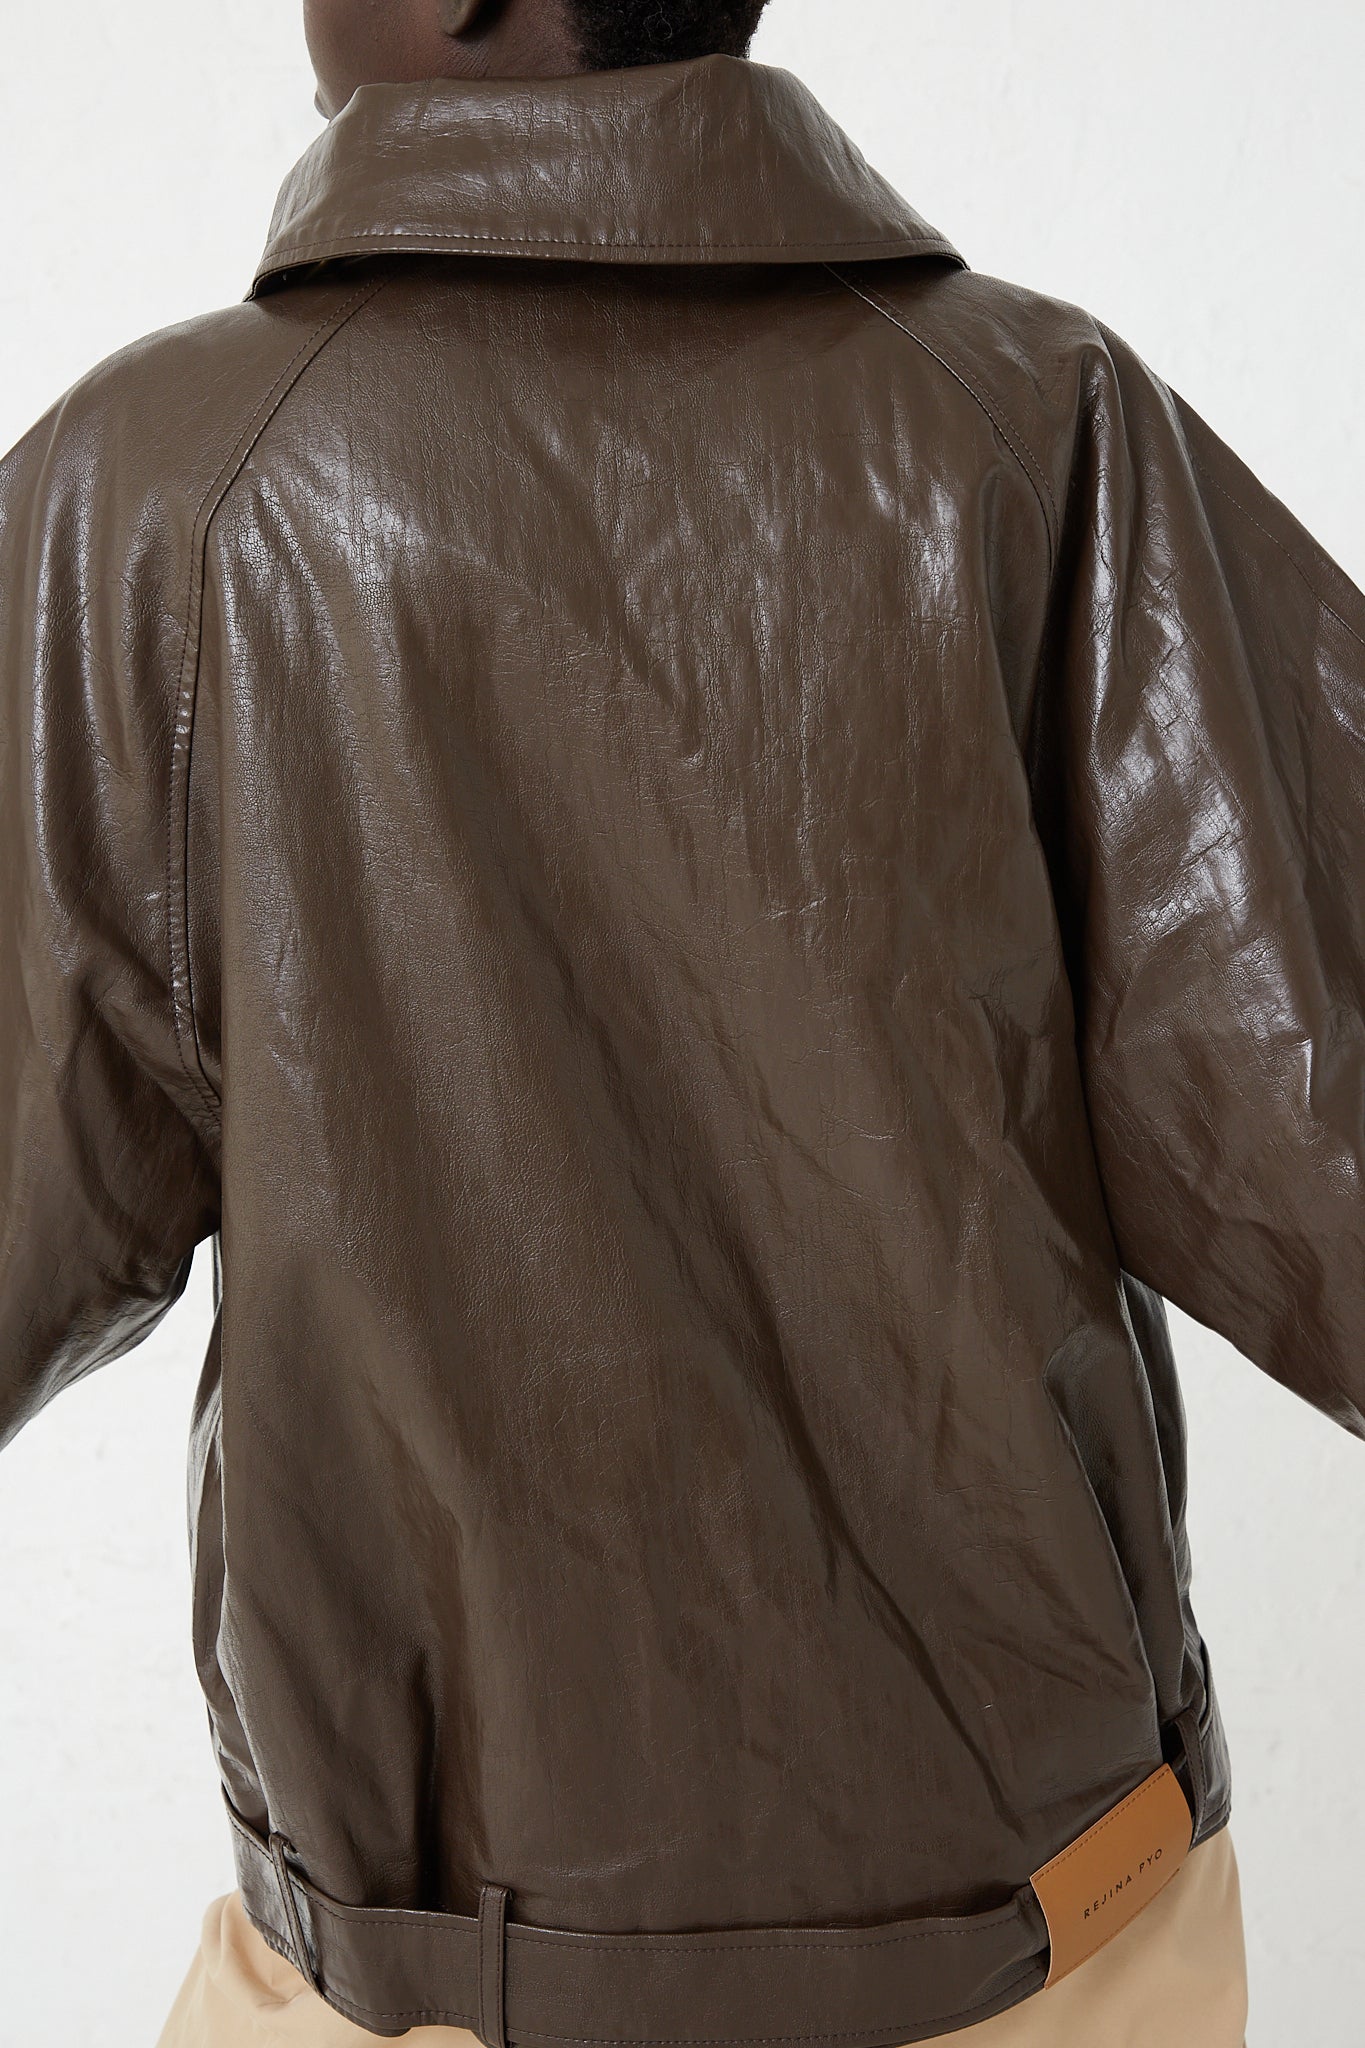 The back of a woman wearing a Rejina Pyo Faux Leather Juno Jacket in Dark Brown.